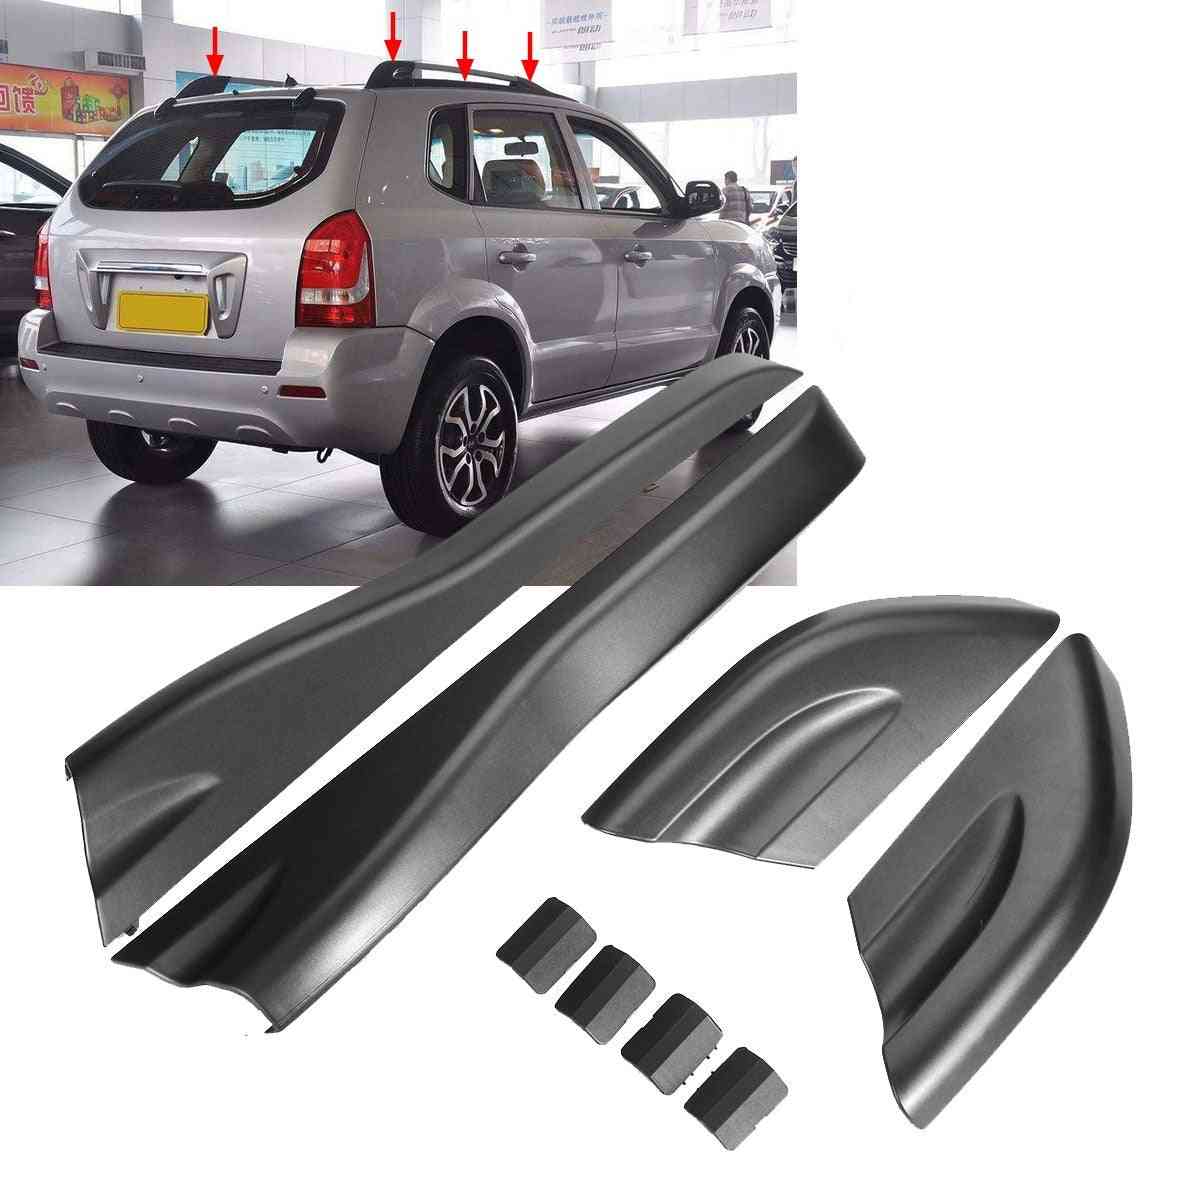 8pcs/set Roof Rack Rail End Protective Cover Shell Cap Replacement